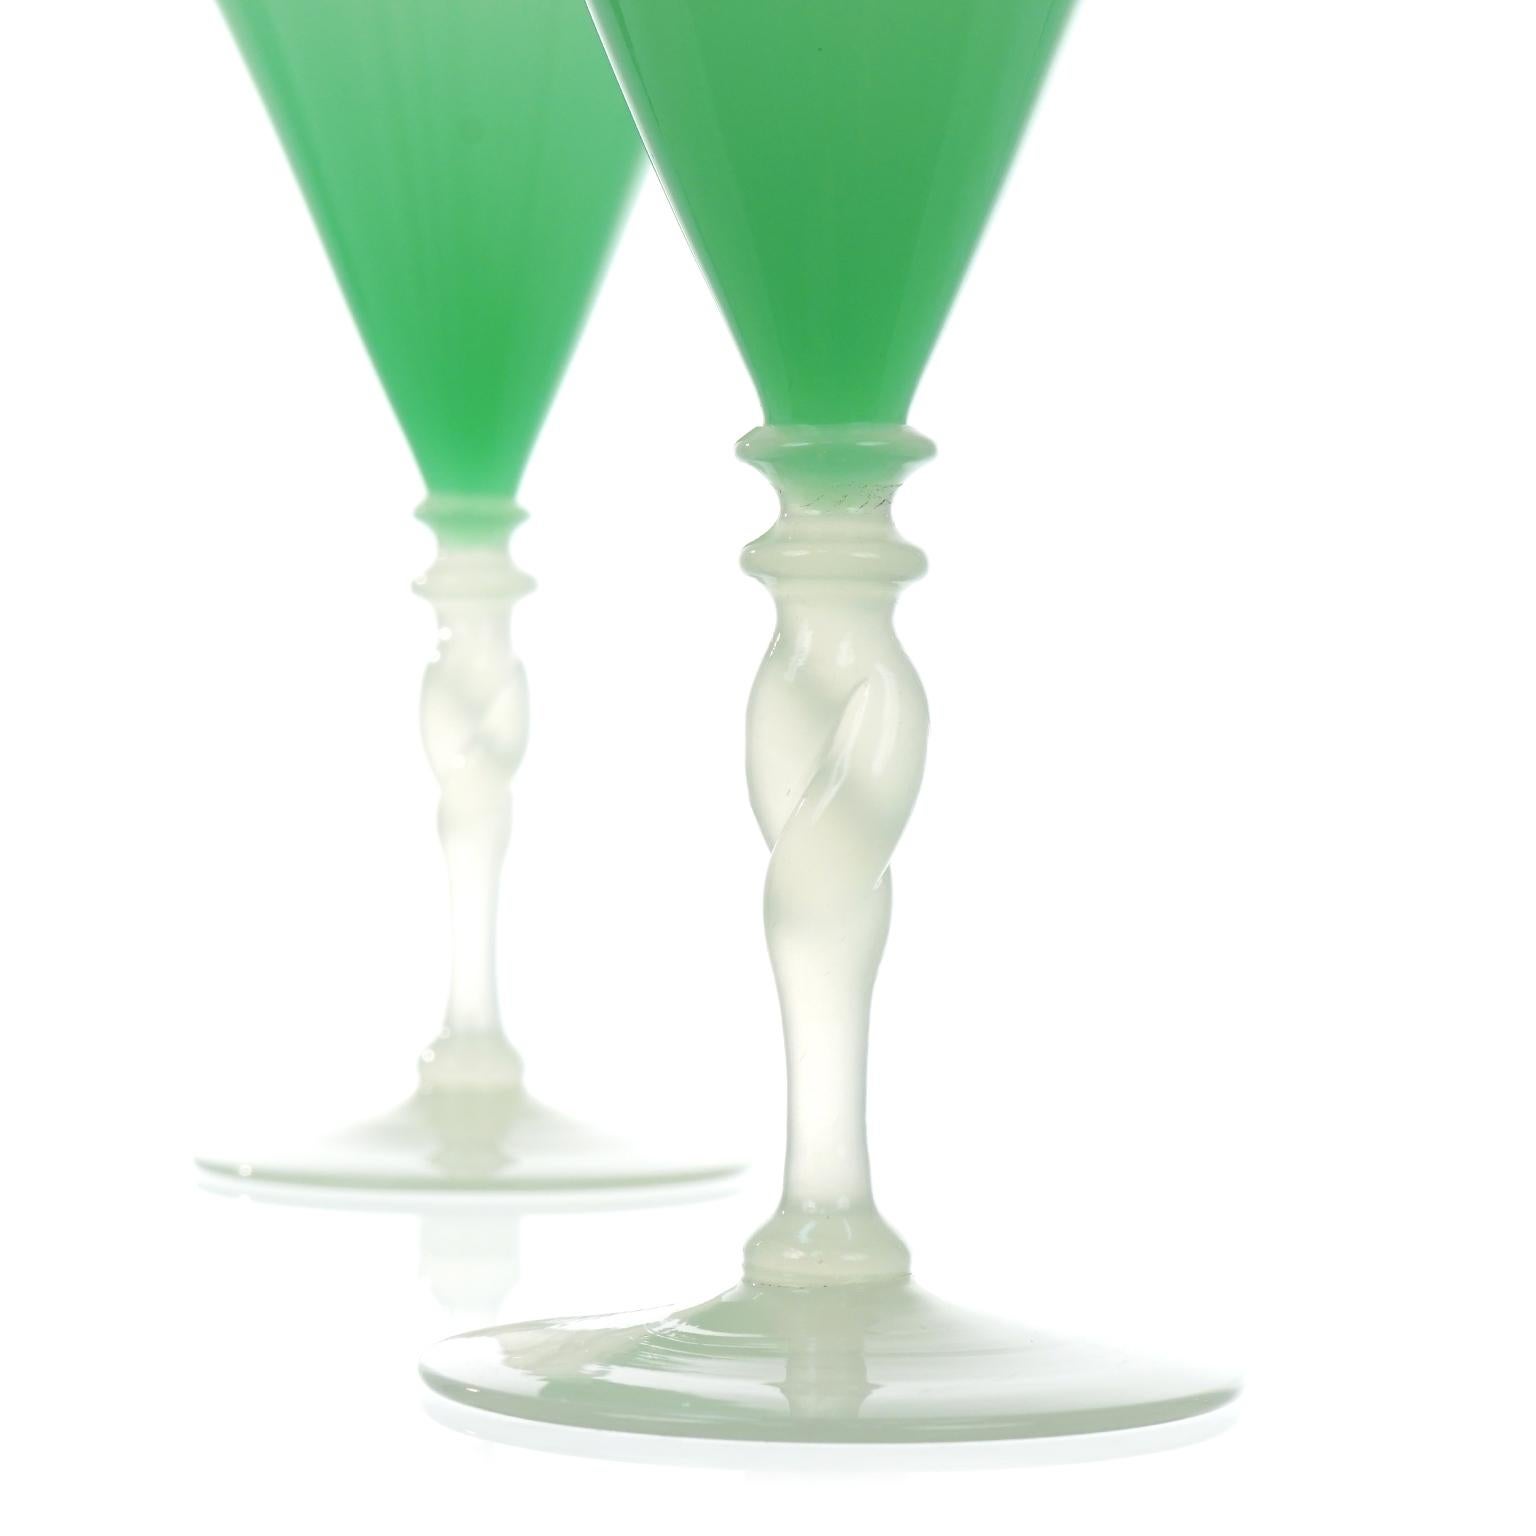 12 Steuben Art Deco Jade and Alabaster Water Goblets In Excellent Condition For Sale In Litchfield, CT